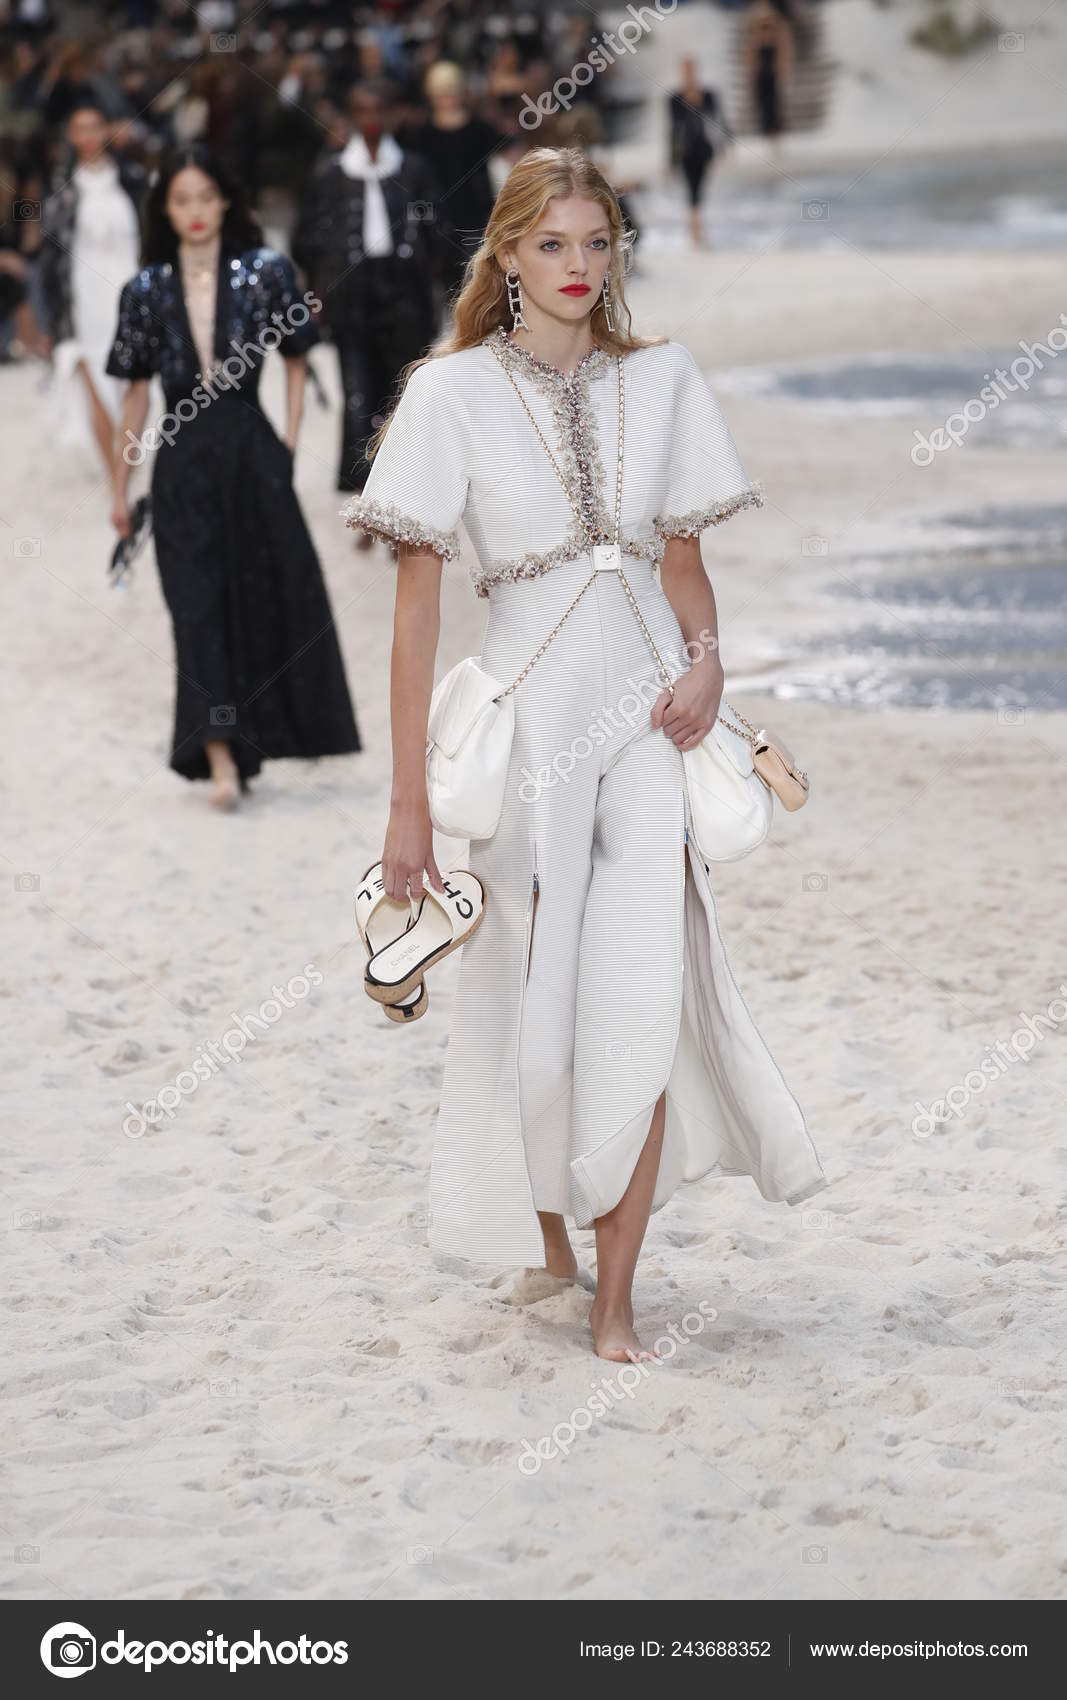 Chanel Spring Summer 2019 Runway Bag Collection